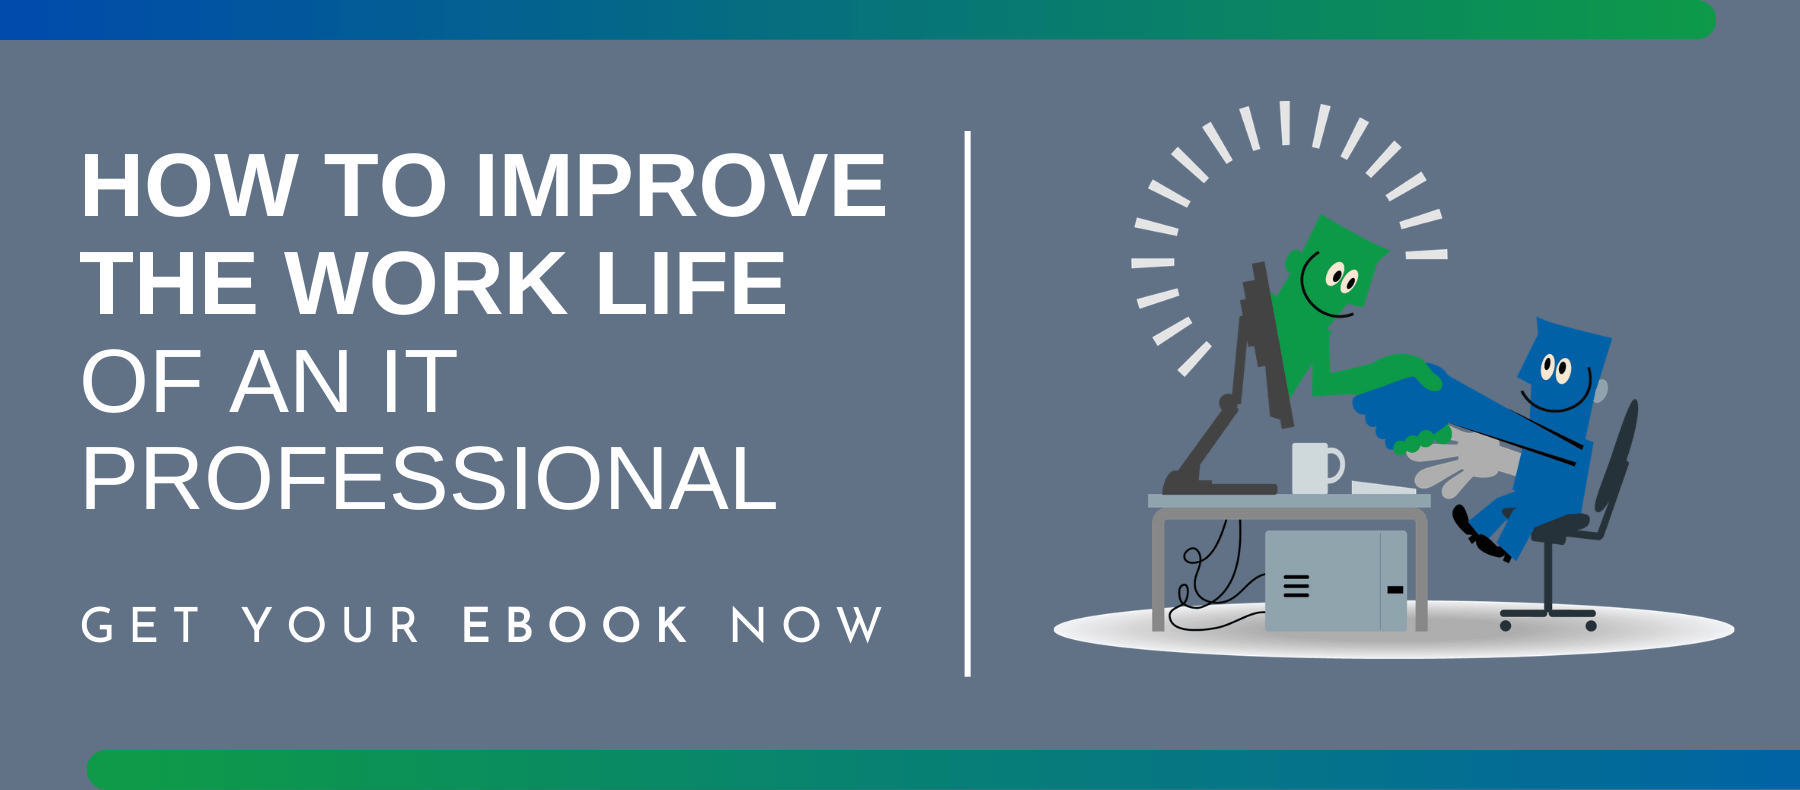 How to Improve the Work-Life of an IT Professional